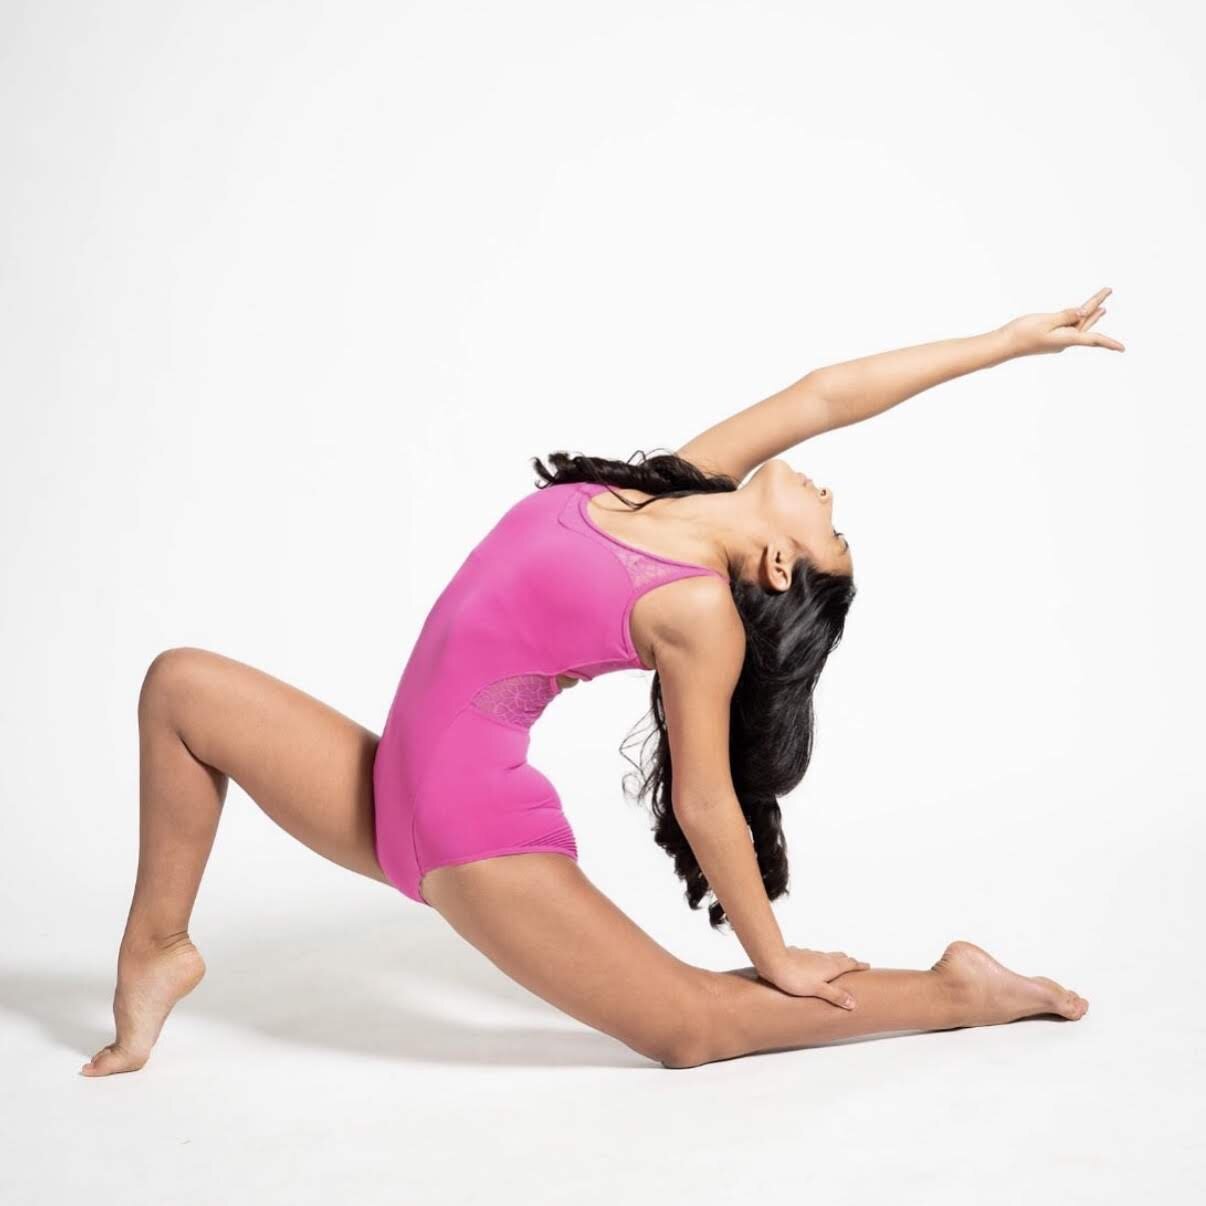 Dancer posing in a stretched pose. (Copy) (Copy) (Copy) (Copy) (Copy) (Copy) (Copy)